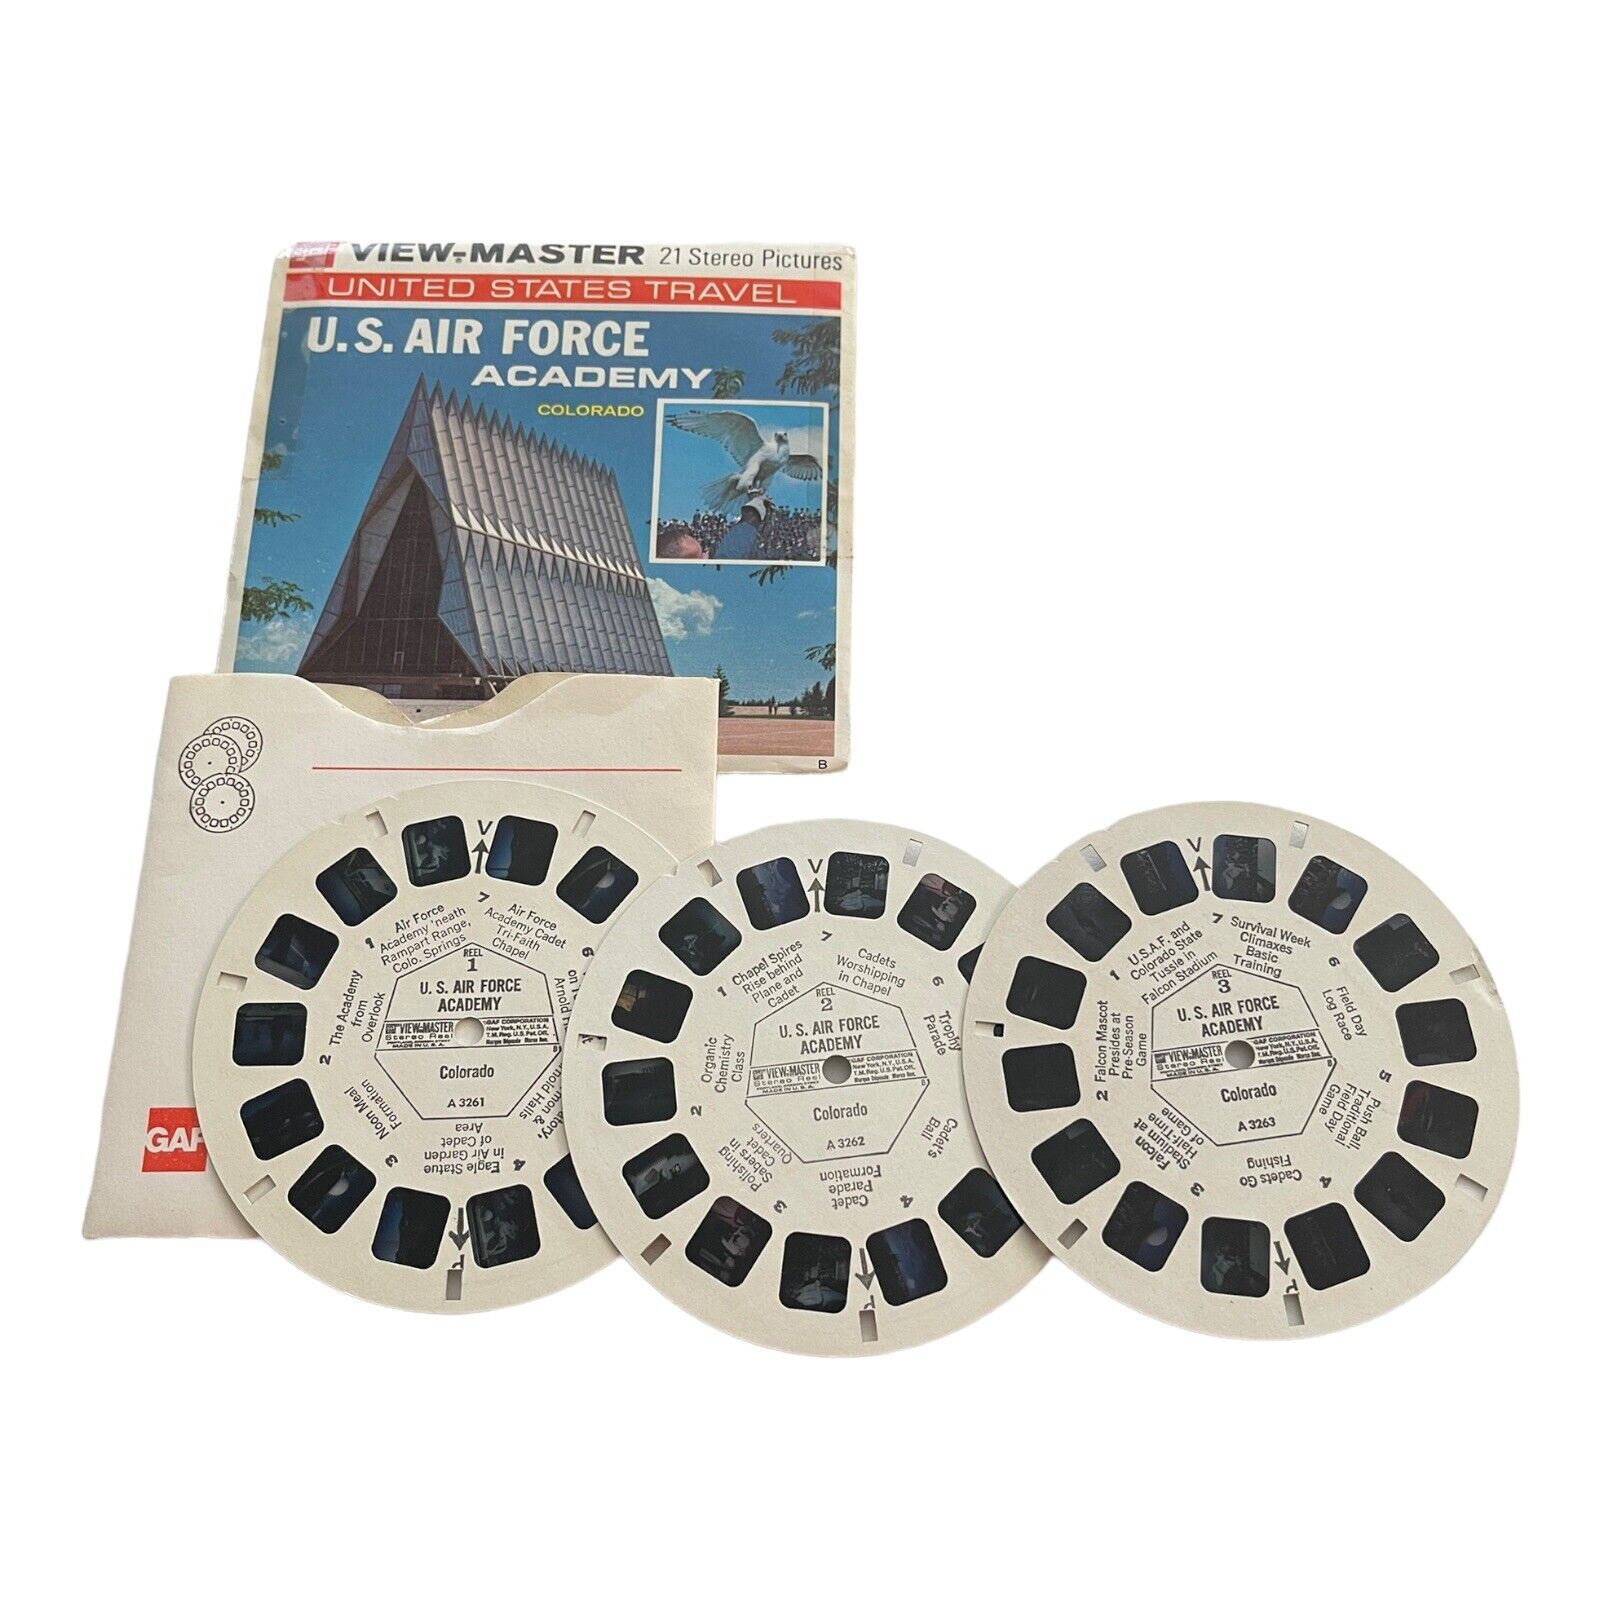 Gaf View-Master A326 US Air Force Academy Colorado US Travel Reels Packet